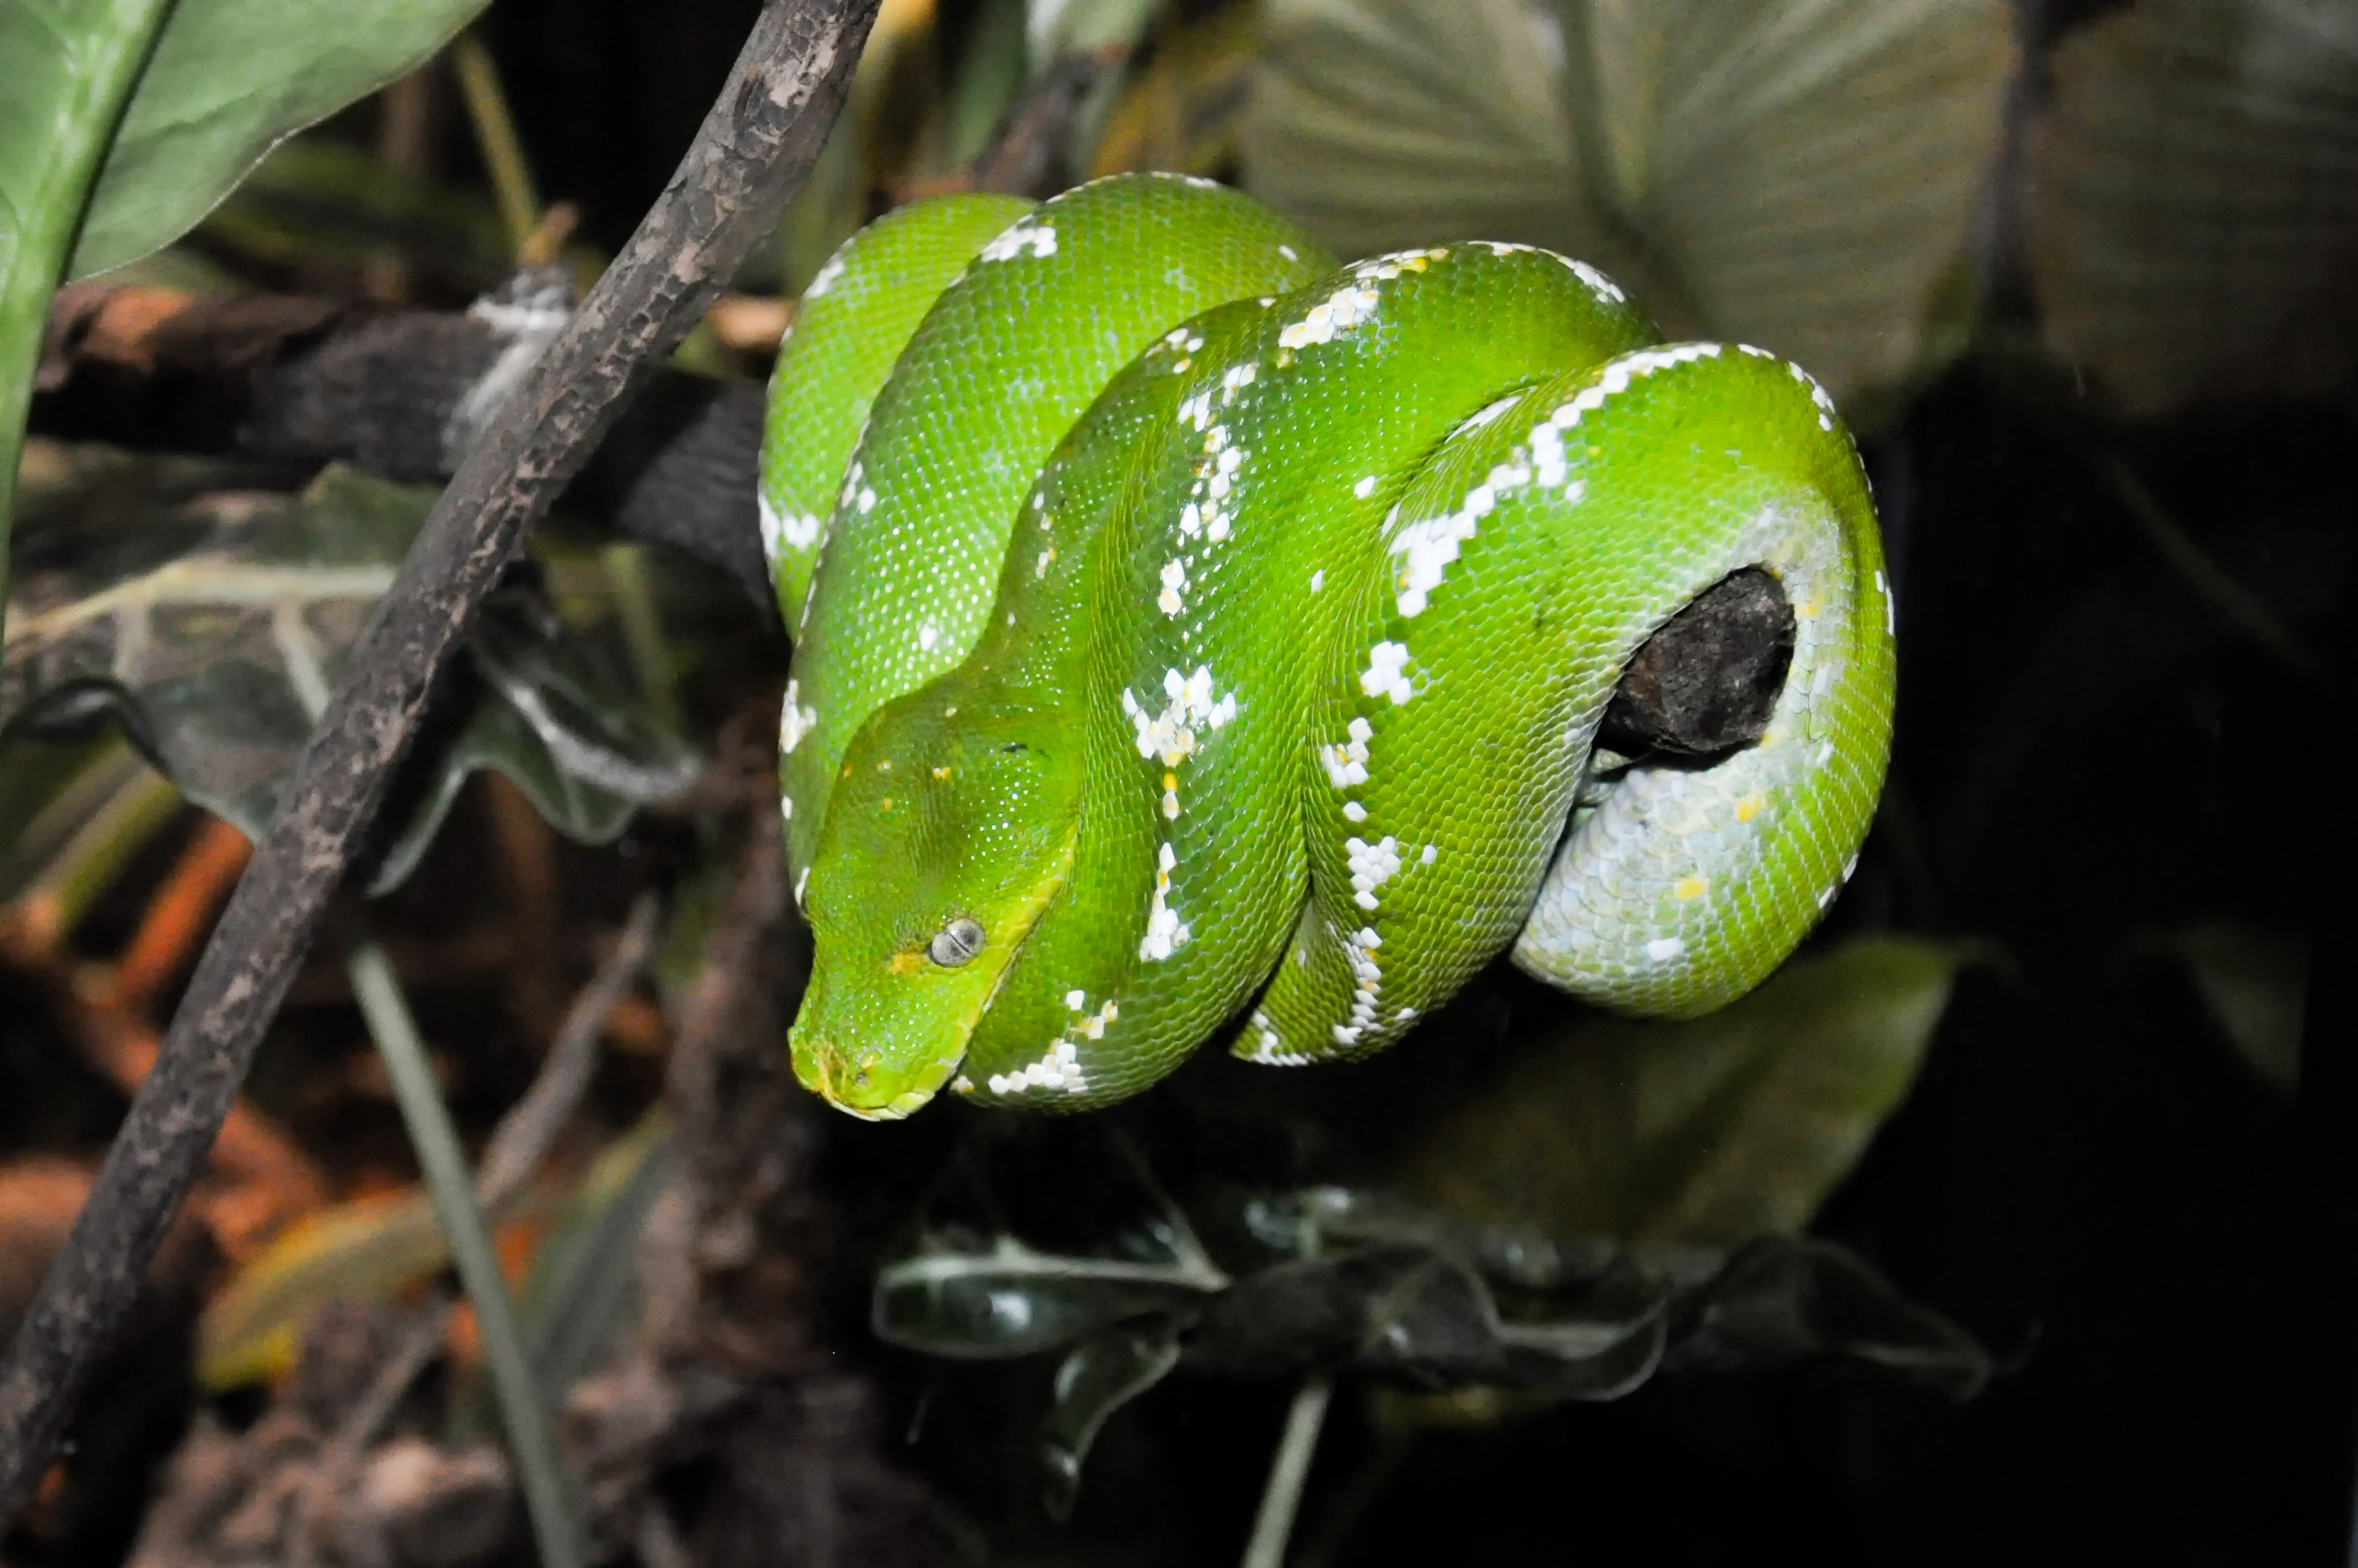 File:Green Tree Python Coiled Around a Branch.jpg - Wikimedia Commons